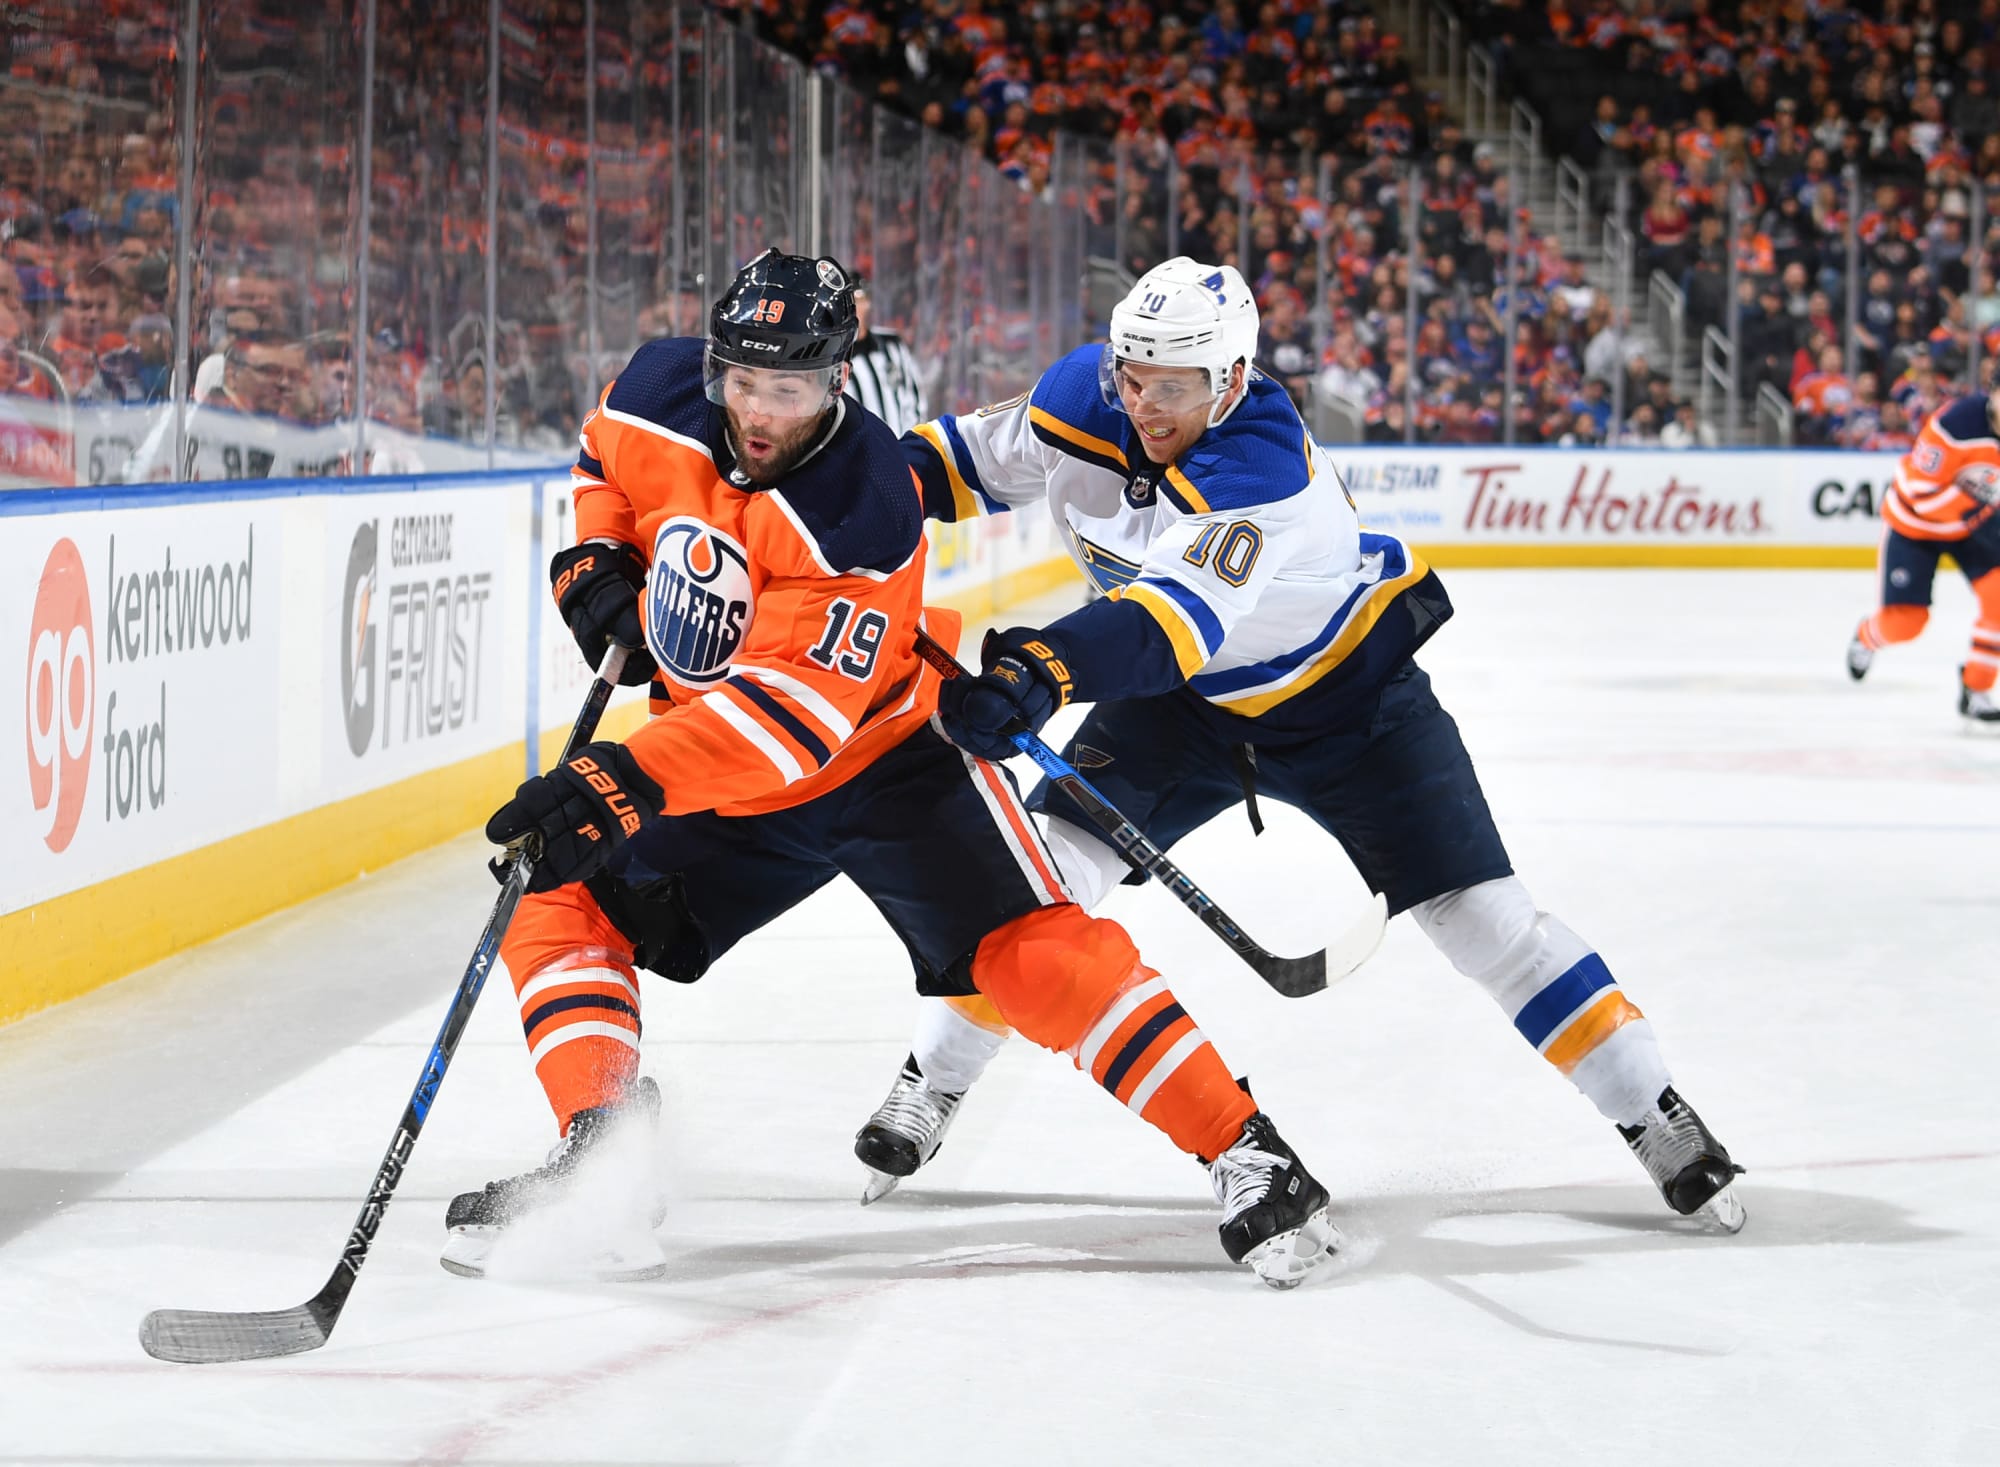 St. Louis Blues Rumors: Patrick Maroon Could Come Home